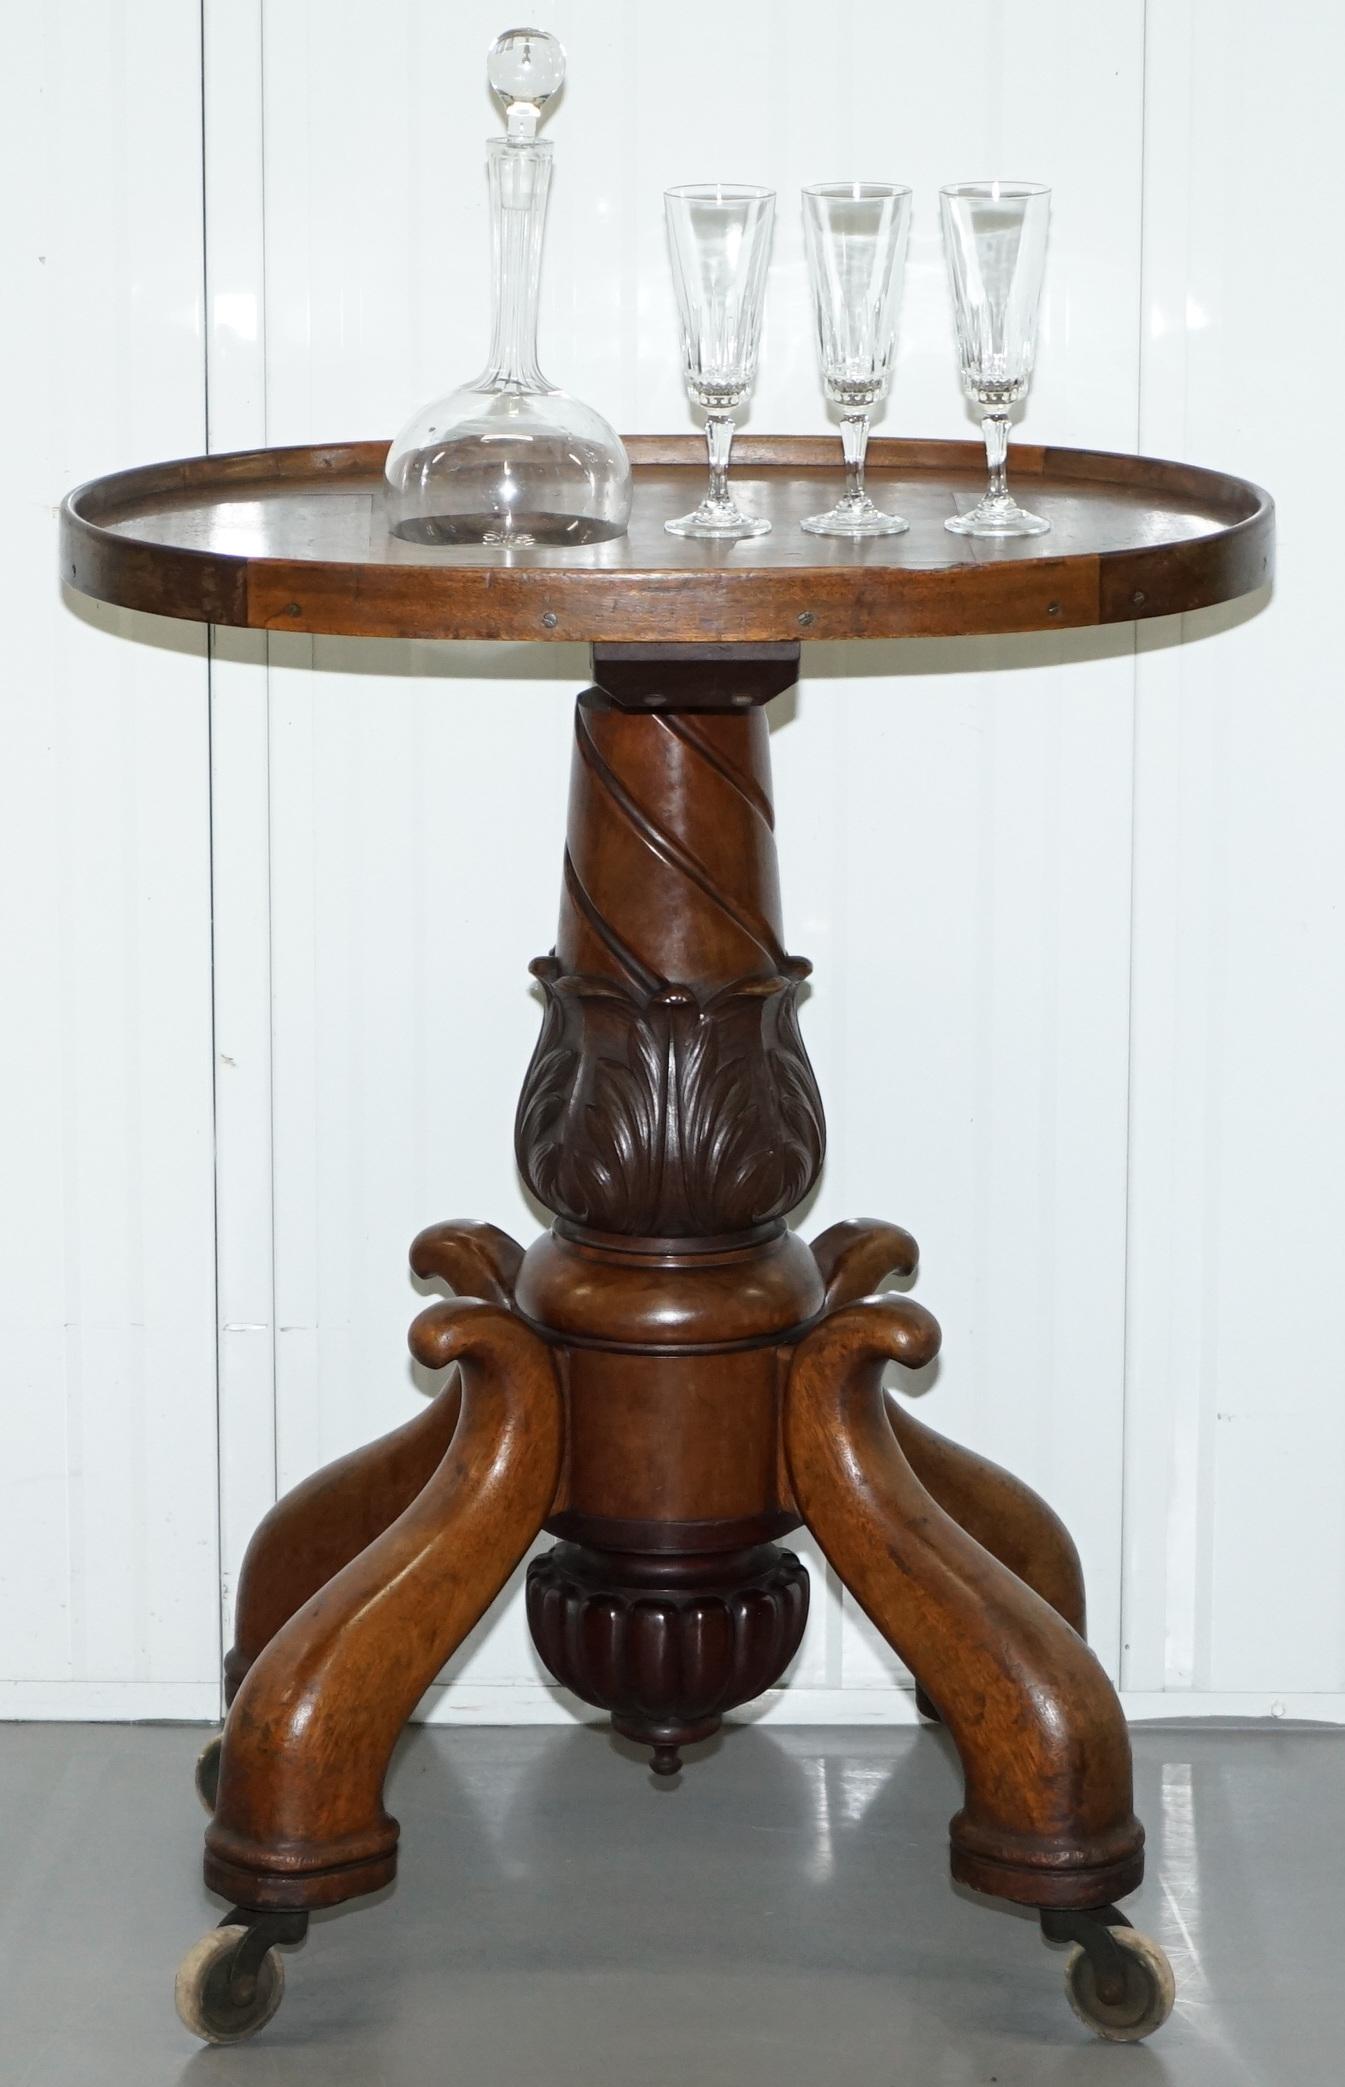 We are delighted to offer for sale this stunning Victorian heavy mahogany with carved column base on wheels side table with built in decanter and three glasses in cut glass crystal

A very rare and good looking drinks serving side table, the piece